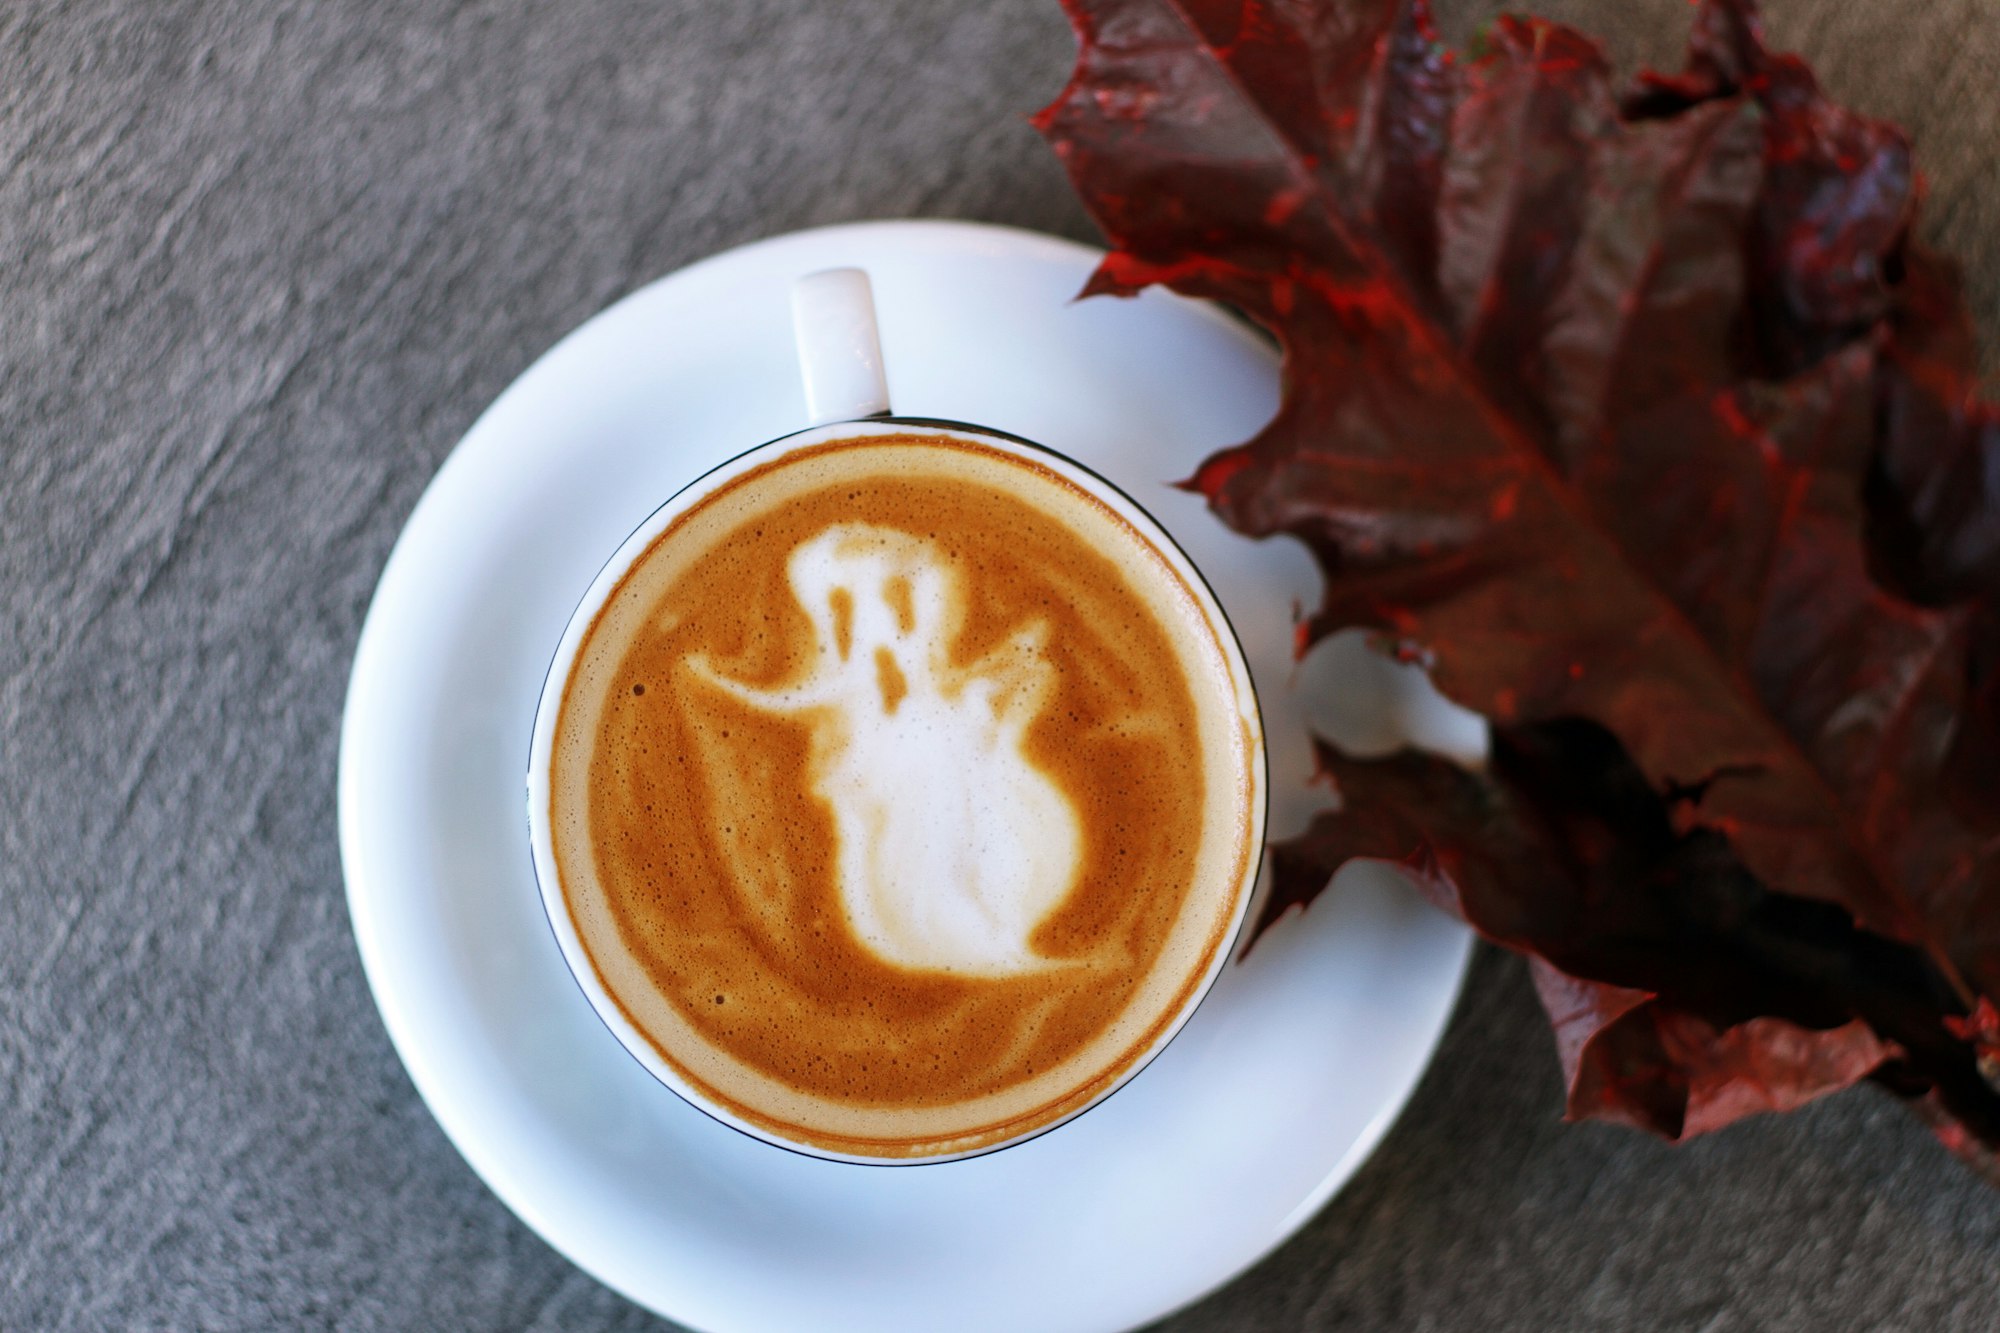 Coffee cup latte with art depicting a ghost for Halloween and pumpkin spice season.